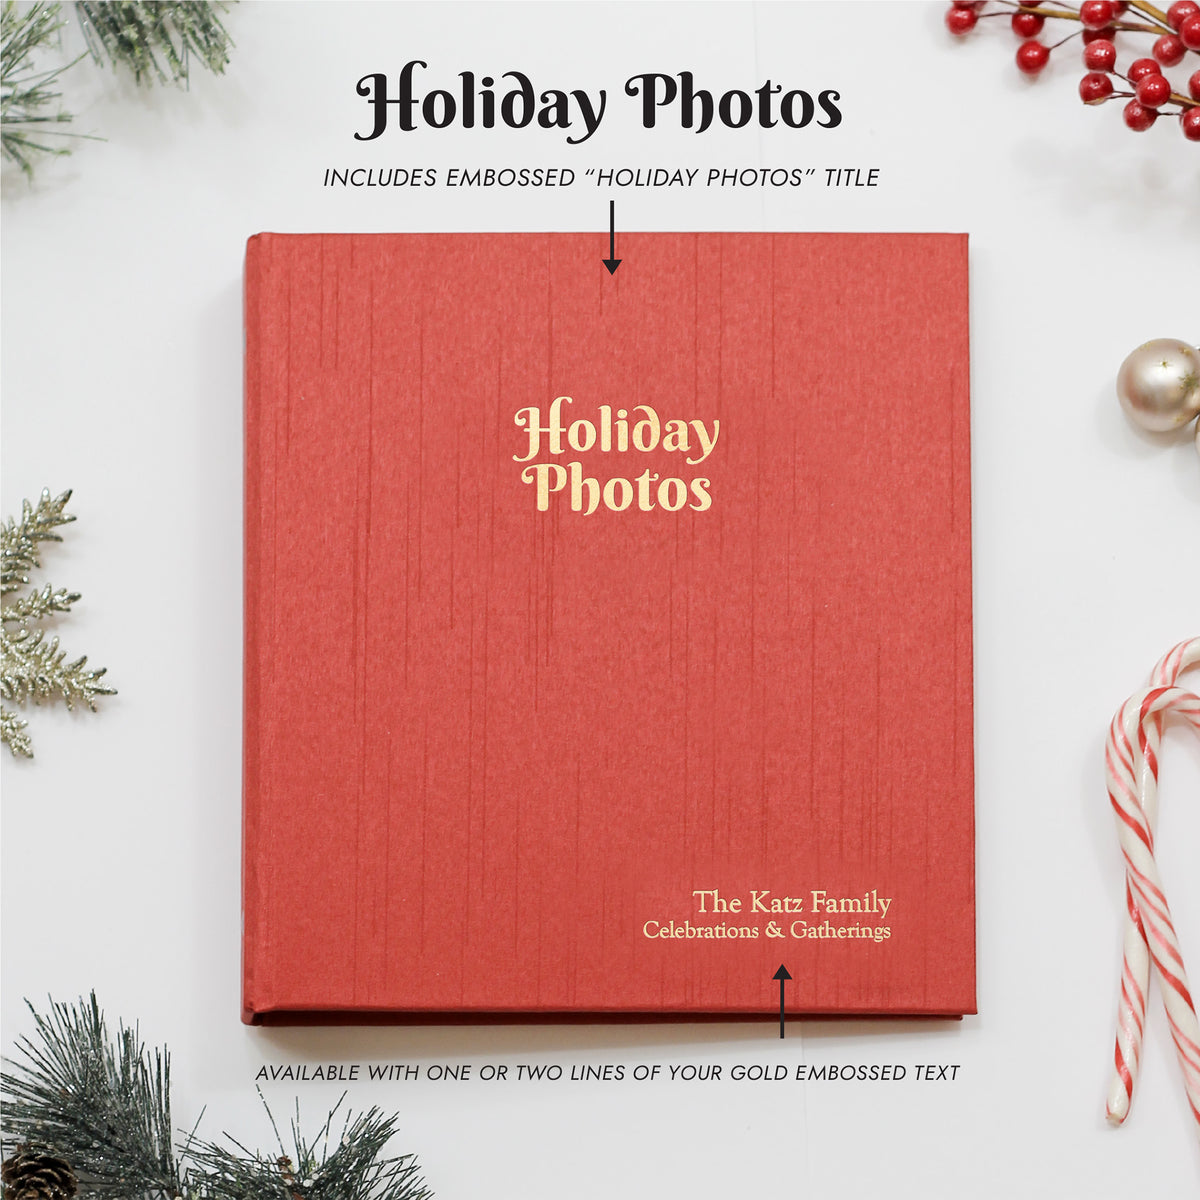 Medium Holiday Photo Binder with Champagne Silk Cover for 4x6 Photos